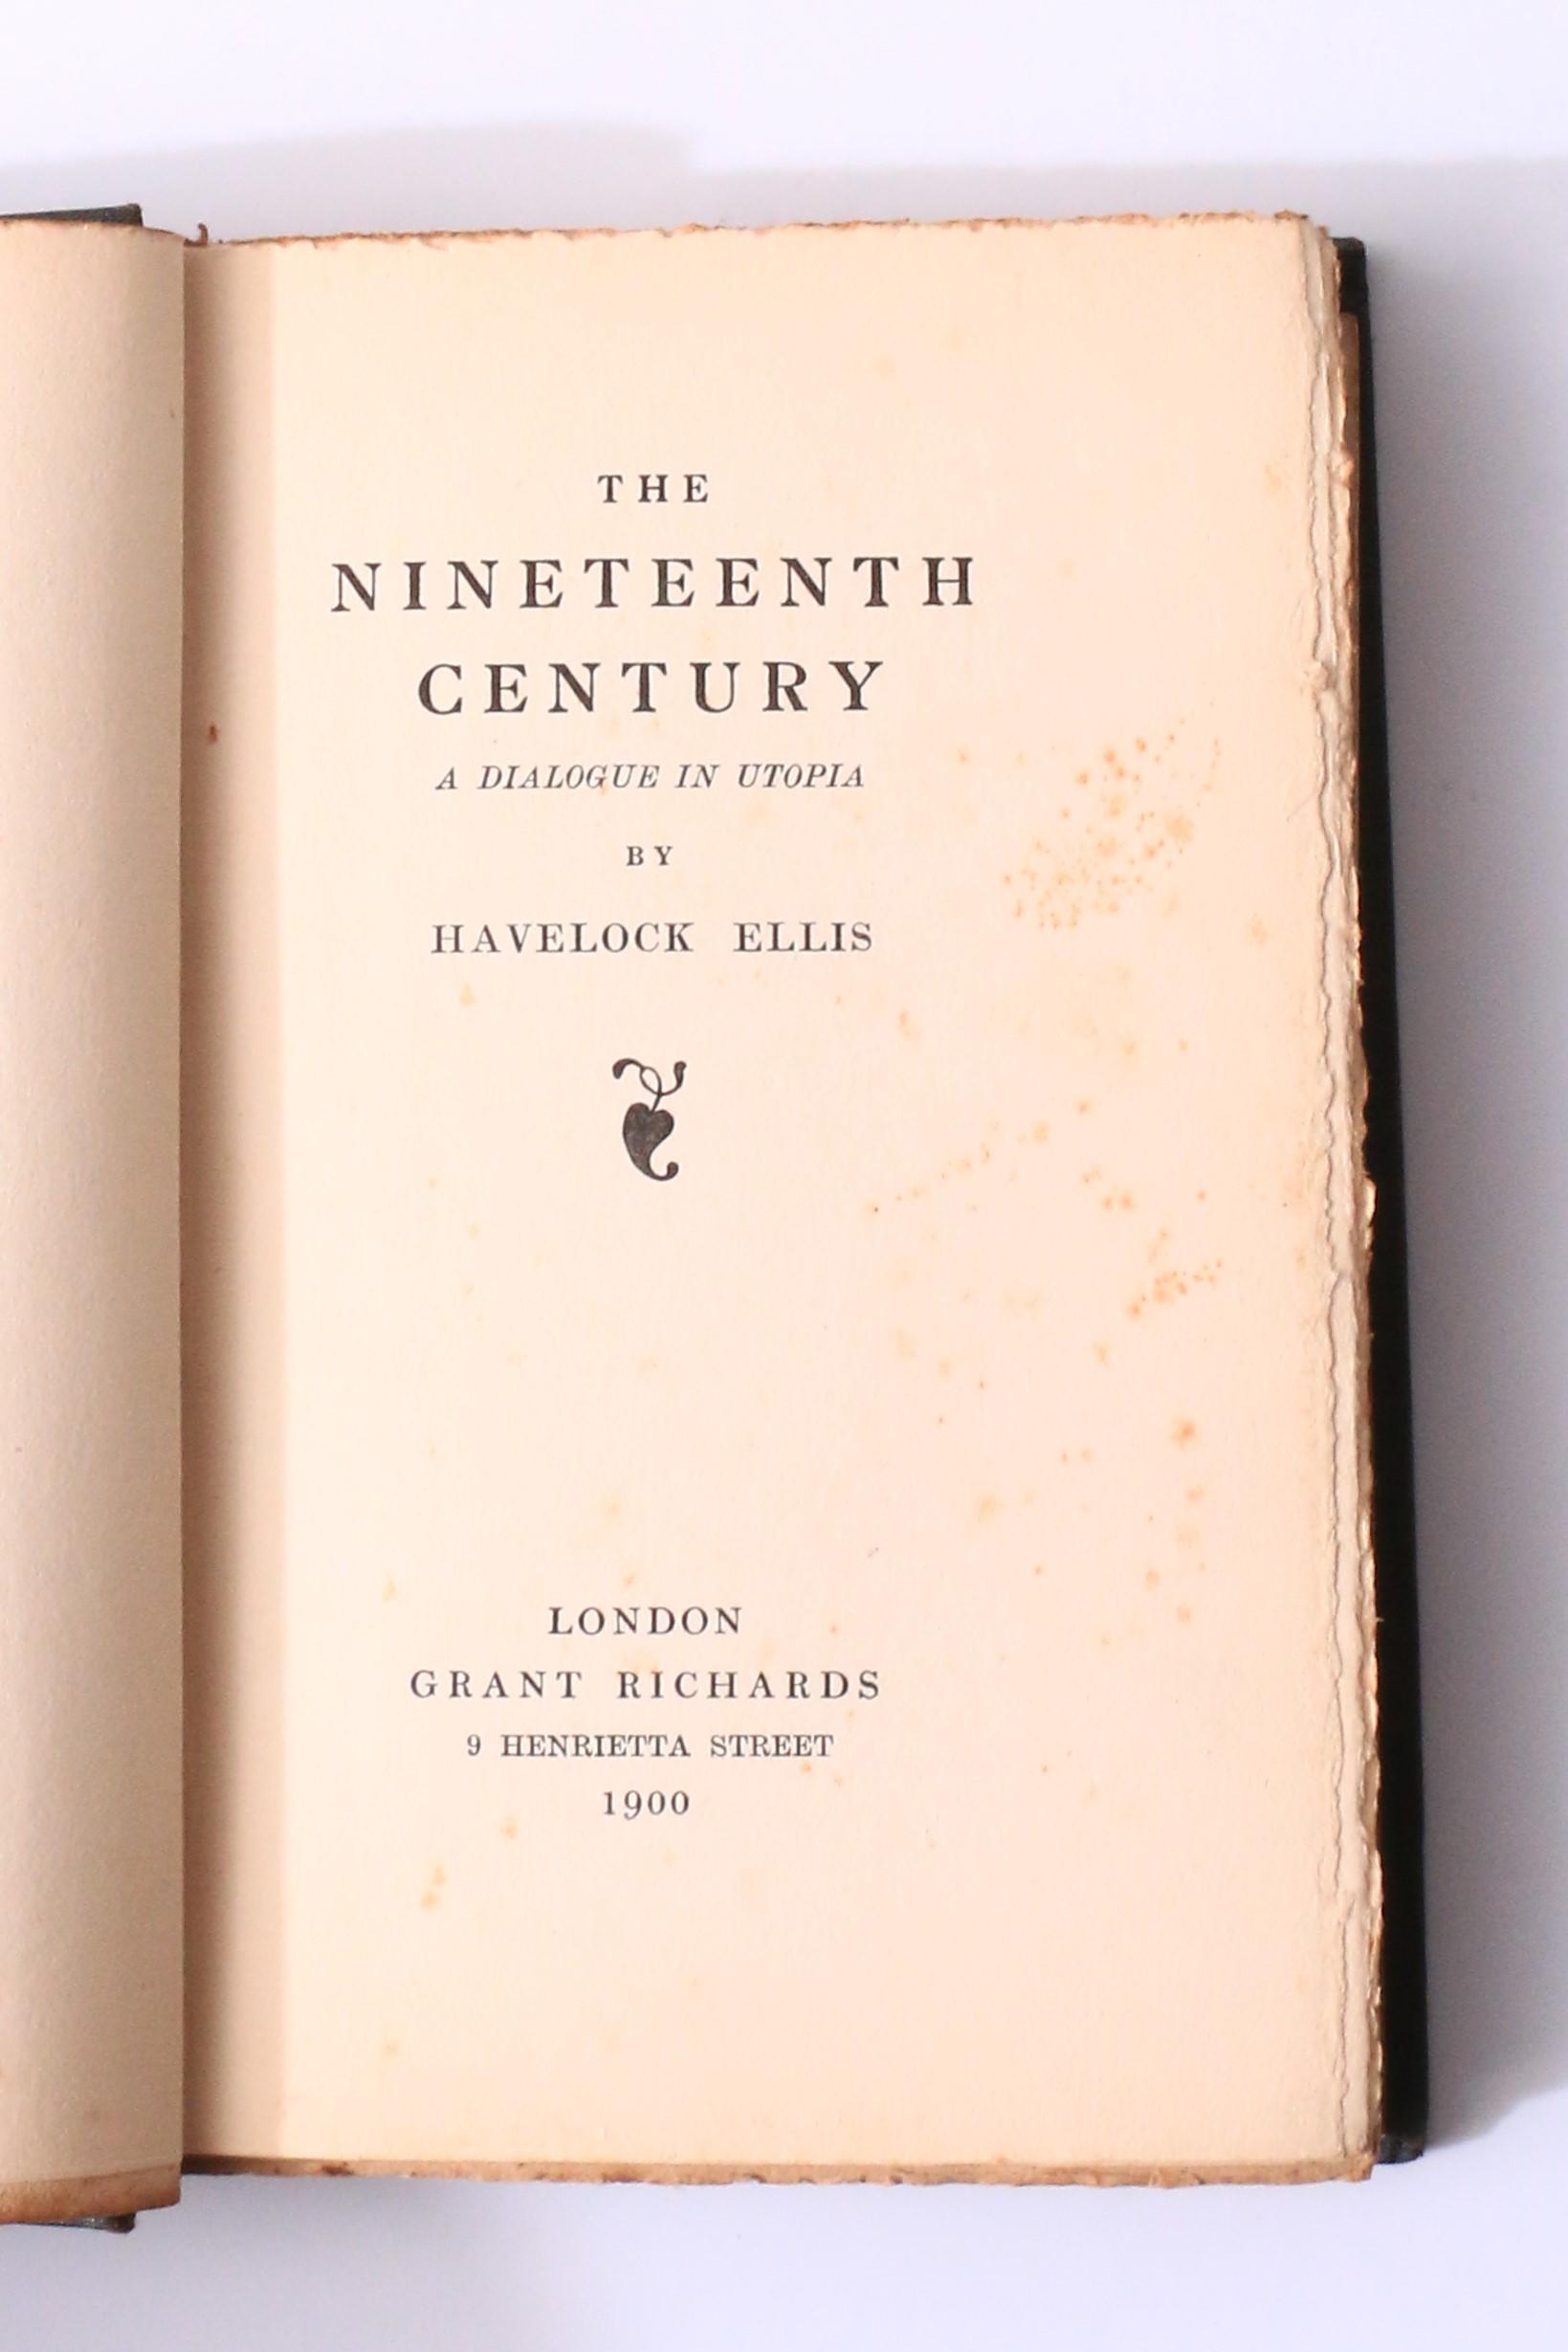 Havelock Ellis - The Nineteenth Century: A Dialogue in Utopia - Grant Richards, 1900, First Edition.